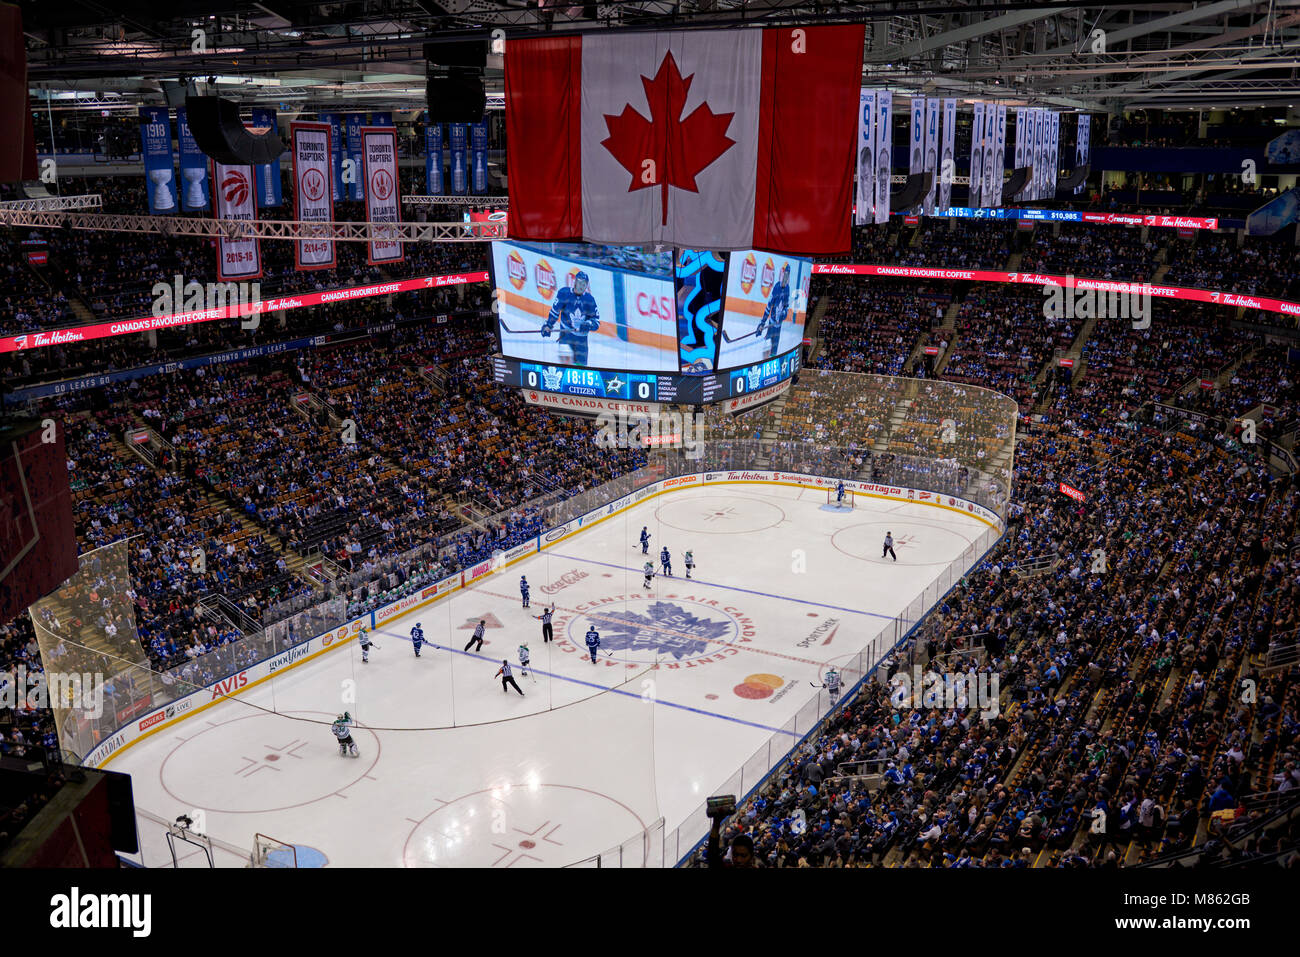 Nhl store hi-res stock photography and images - Alamy